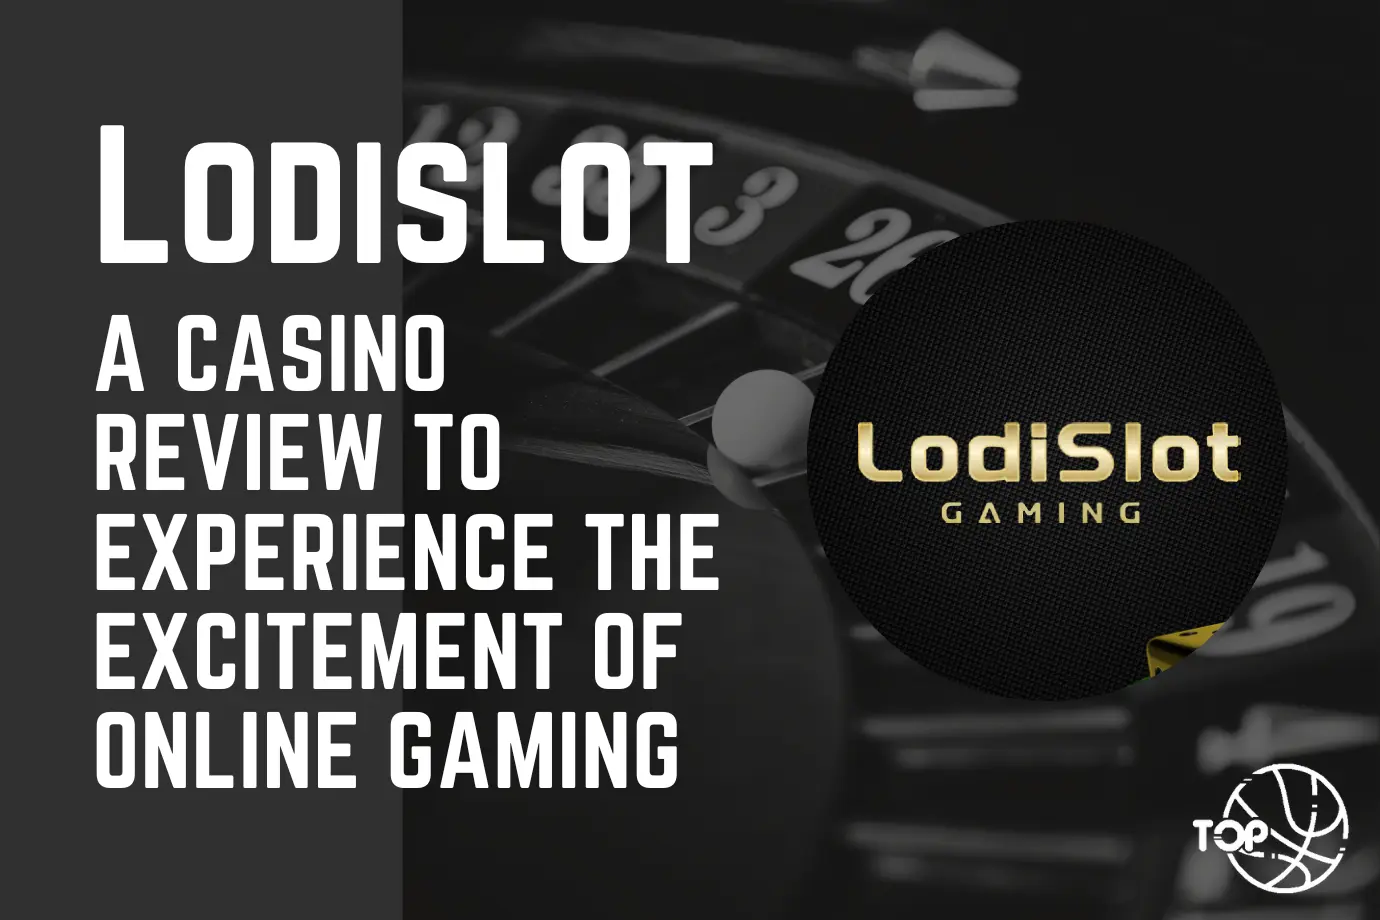 Lodislot A Casino Review to Experience the Excitement of Online Gaming